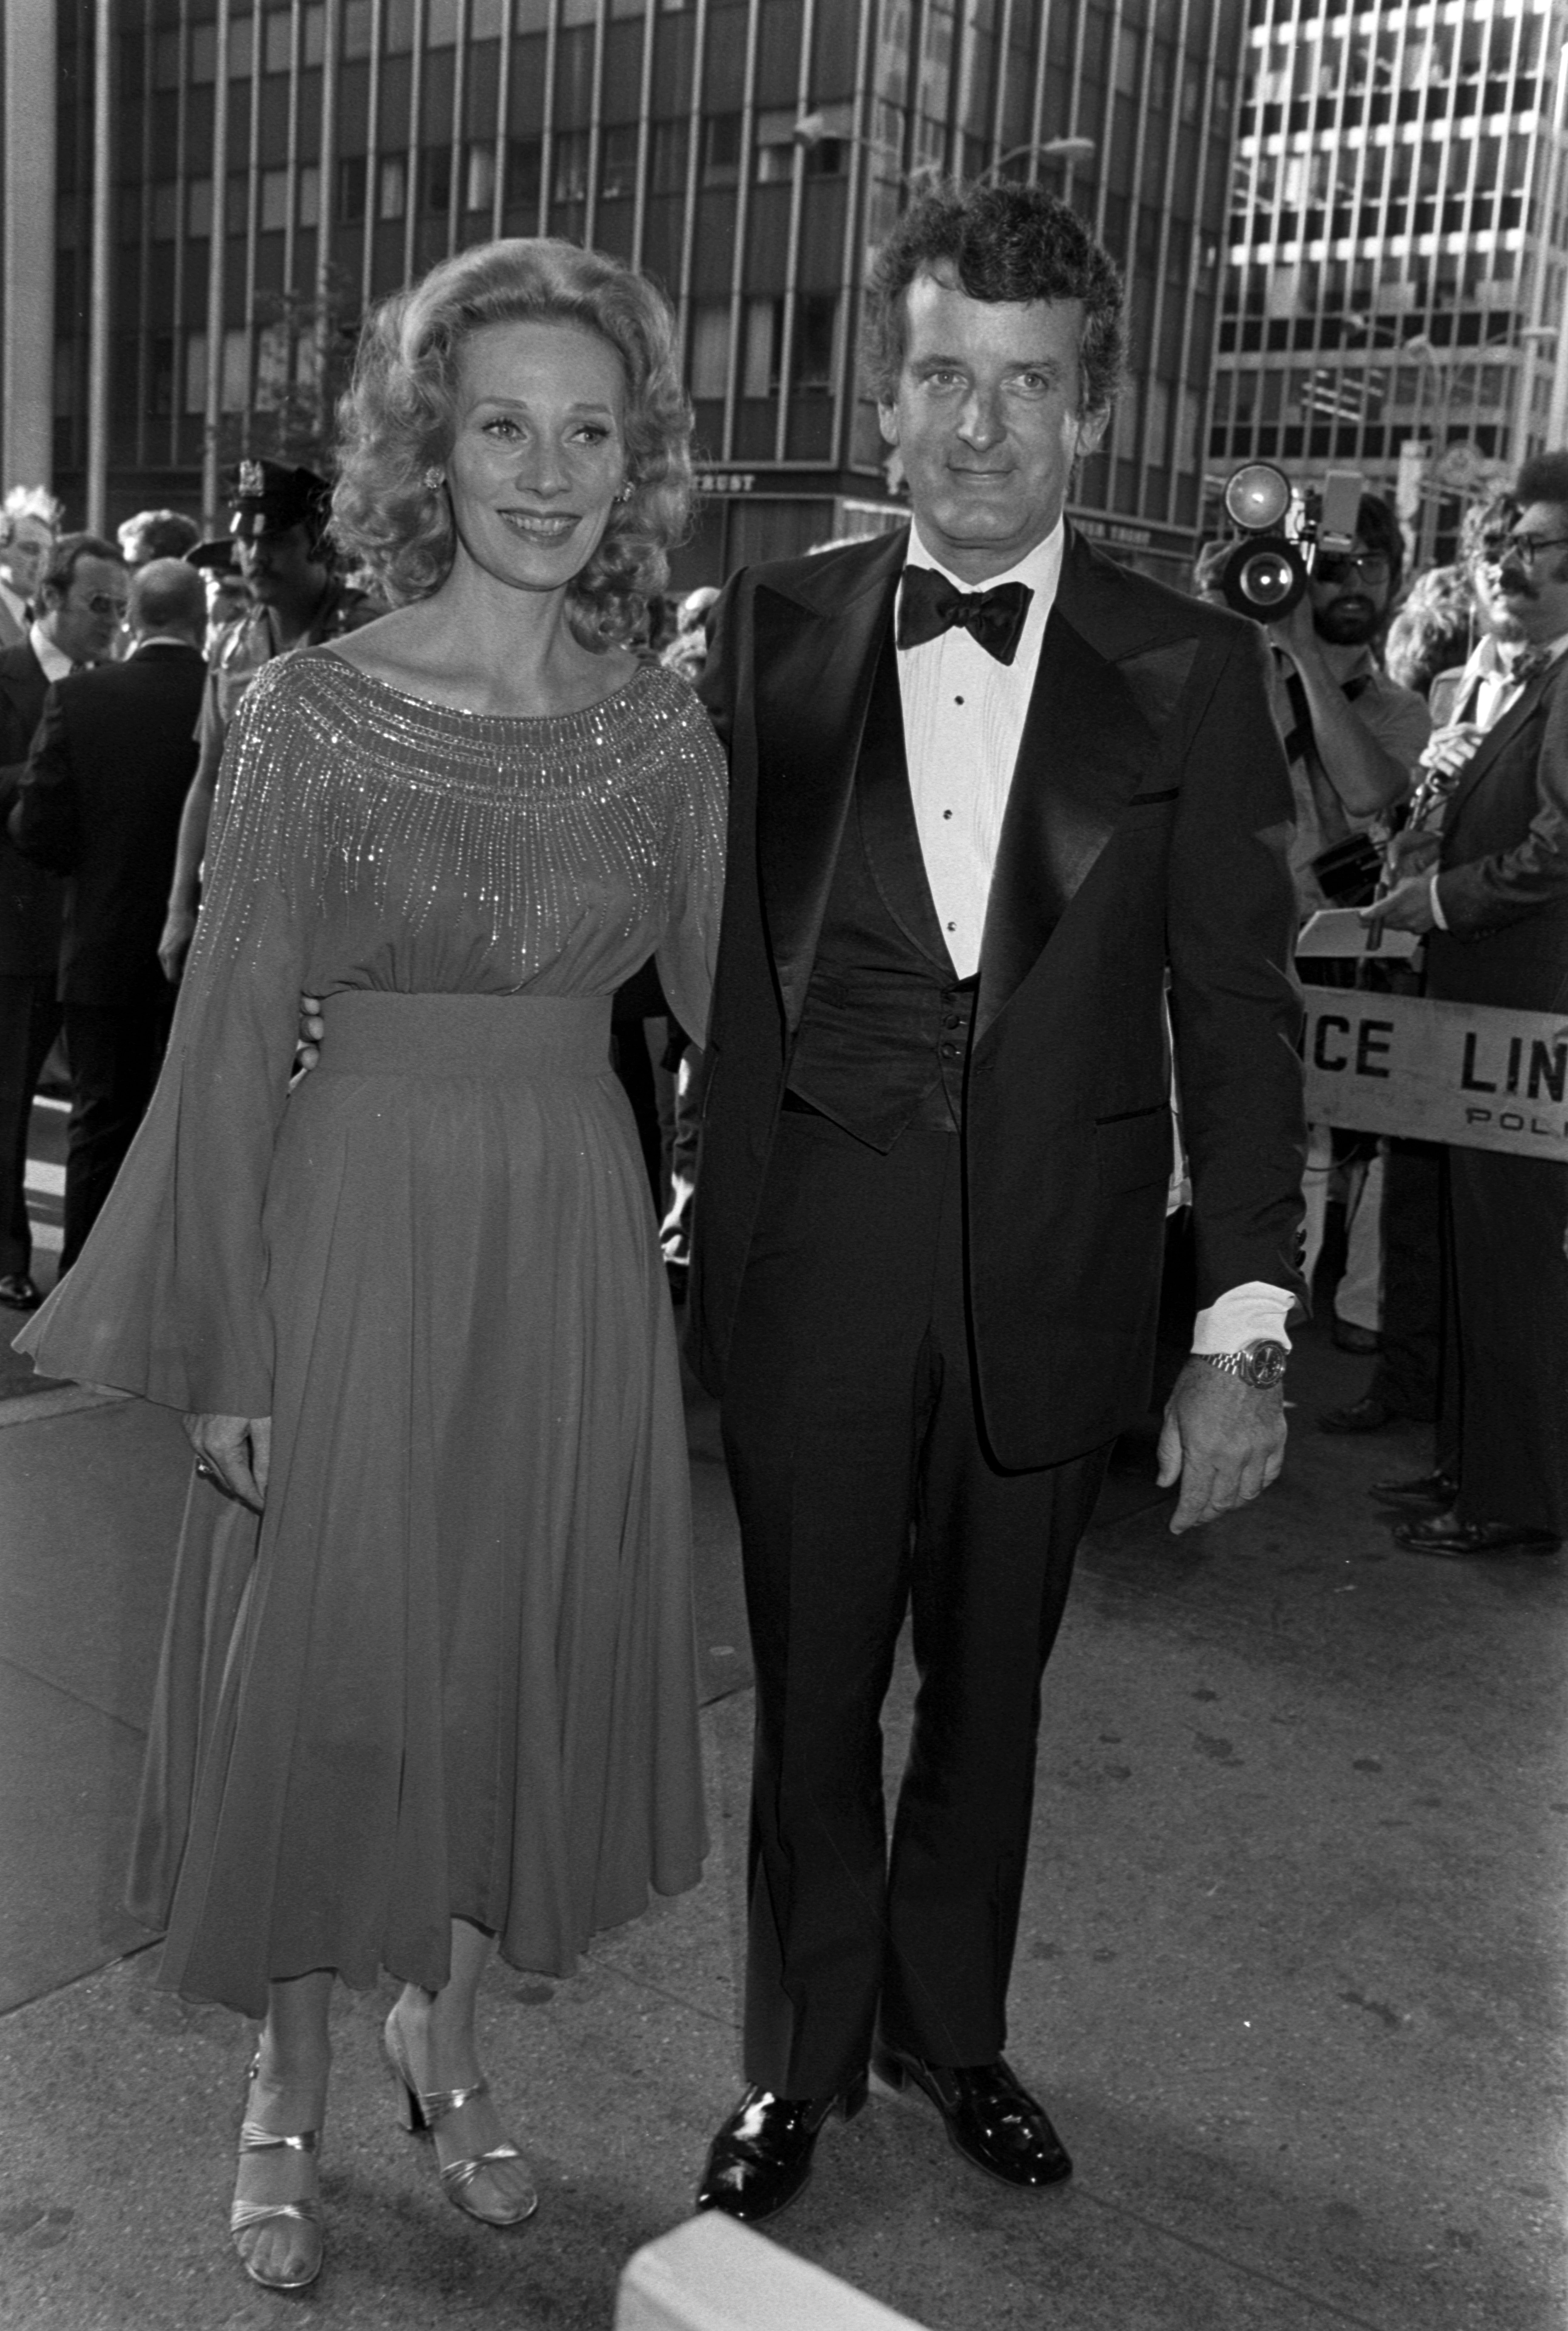 Candace Hilligoss and Nicholas Coster attend an event at Radio City Music Hall in New York City on June 29, 1977. | Source: Getty Images